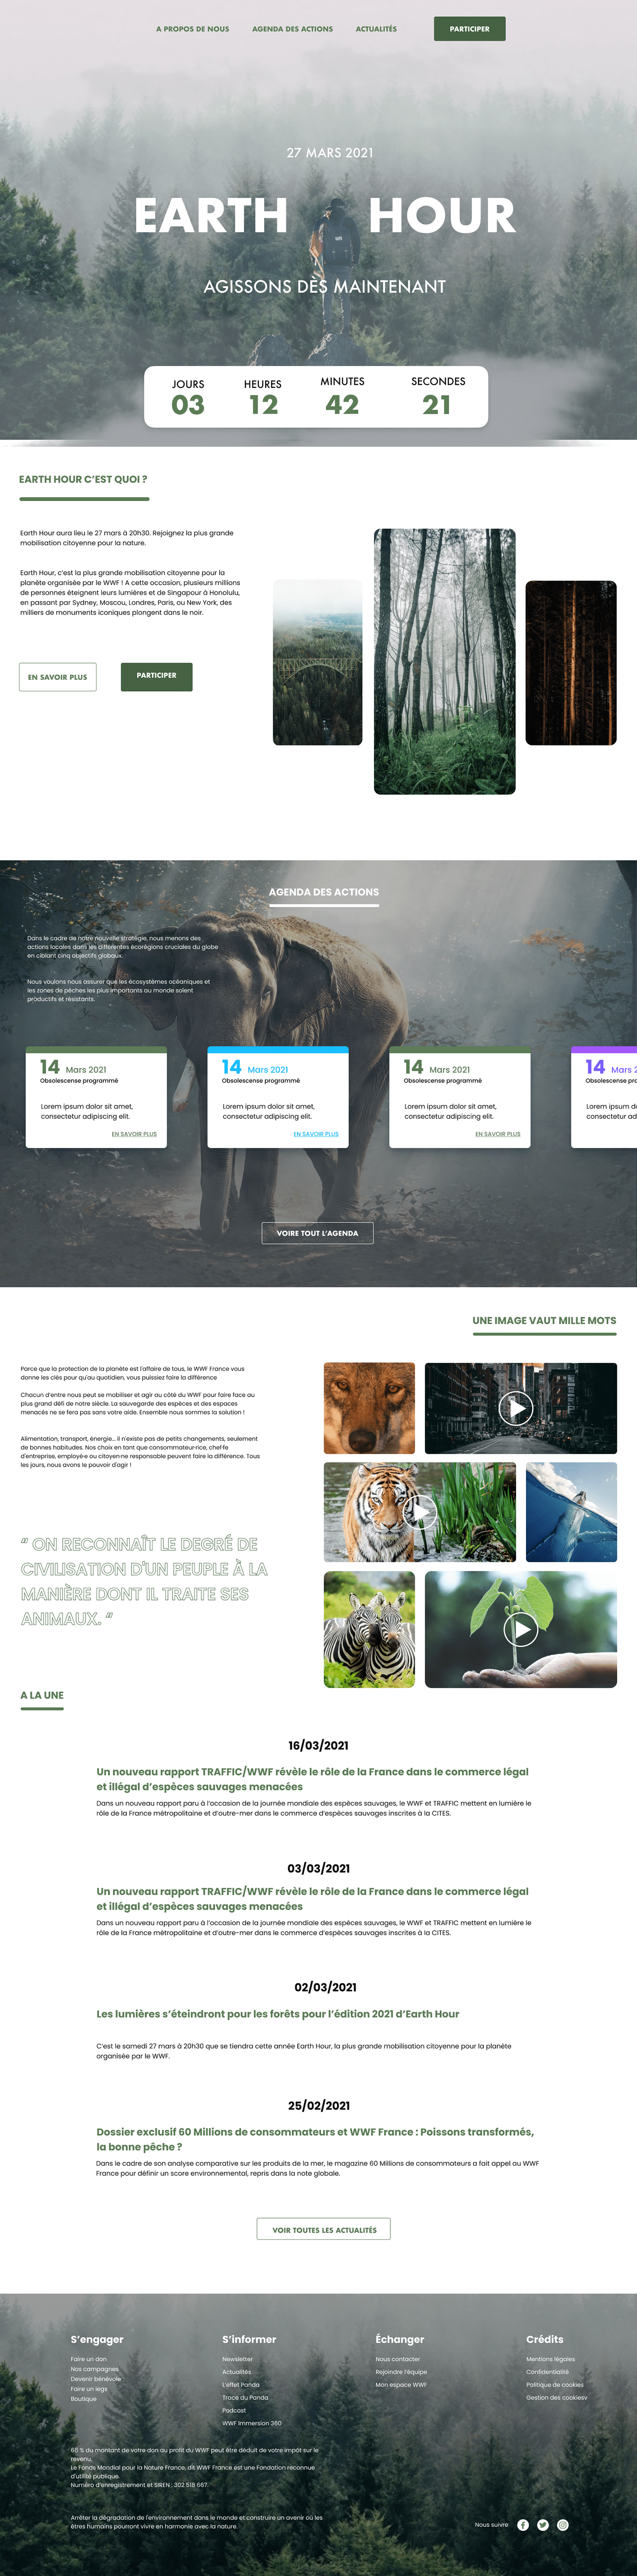 Association branding  earth hour Ecology landing page planet student ux/ui